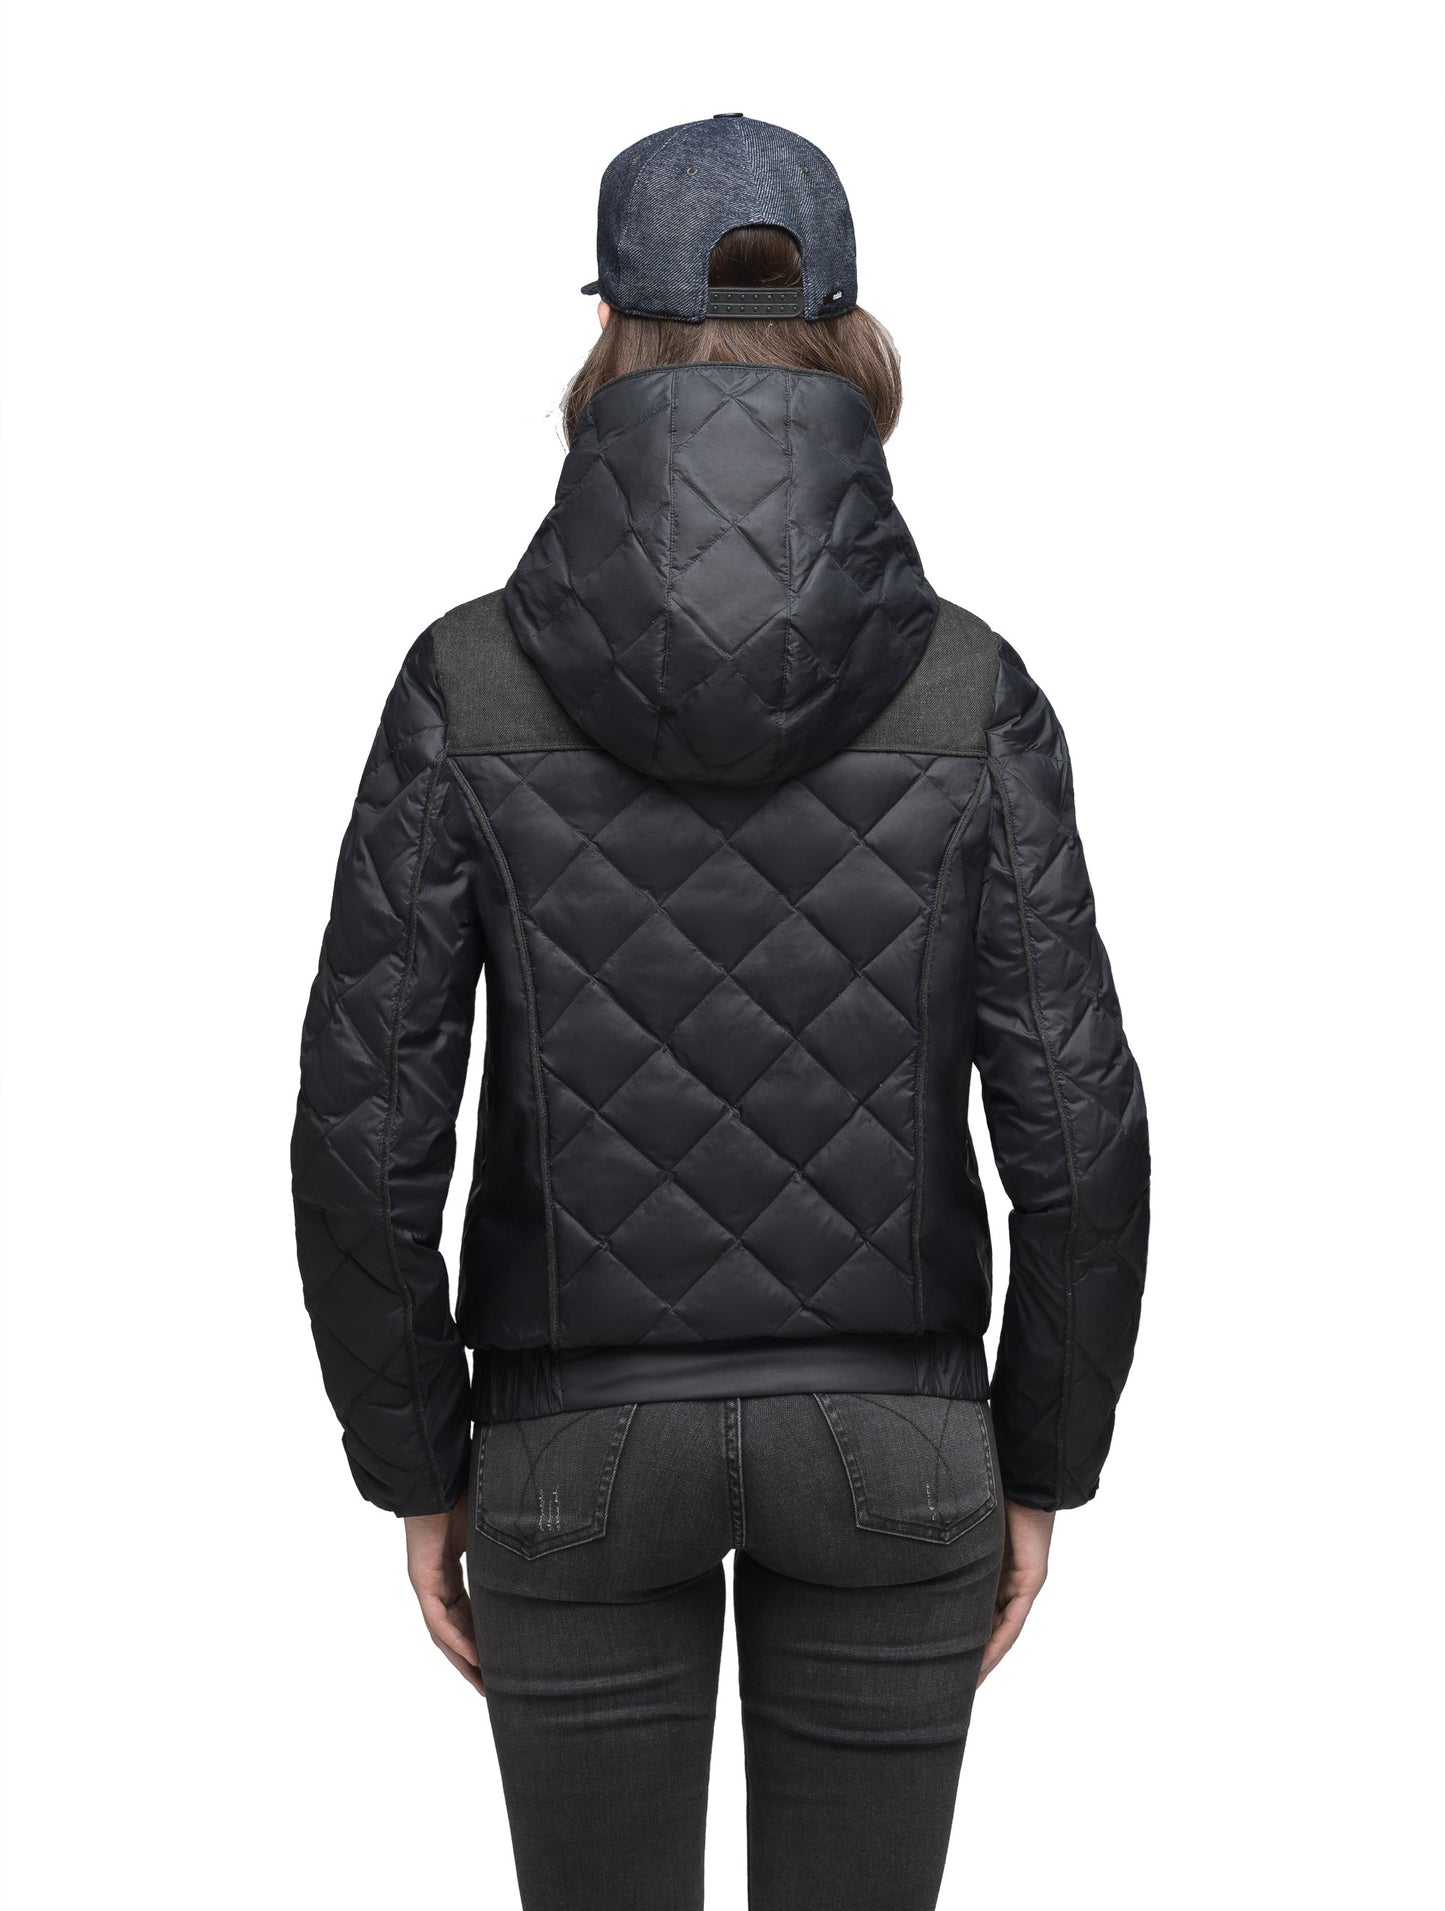 Lightweight women's jacket with hood and quilted pattern featuring a contrasting upper fabric in Black